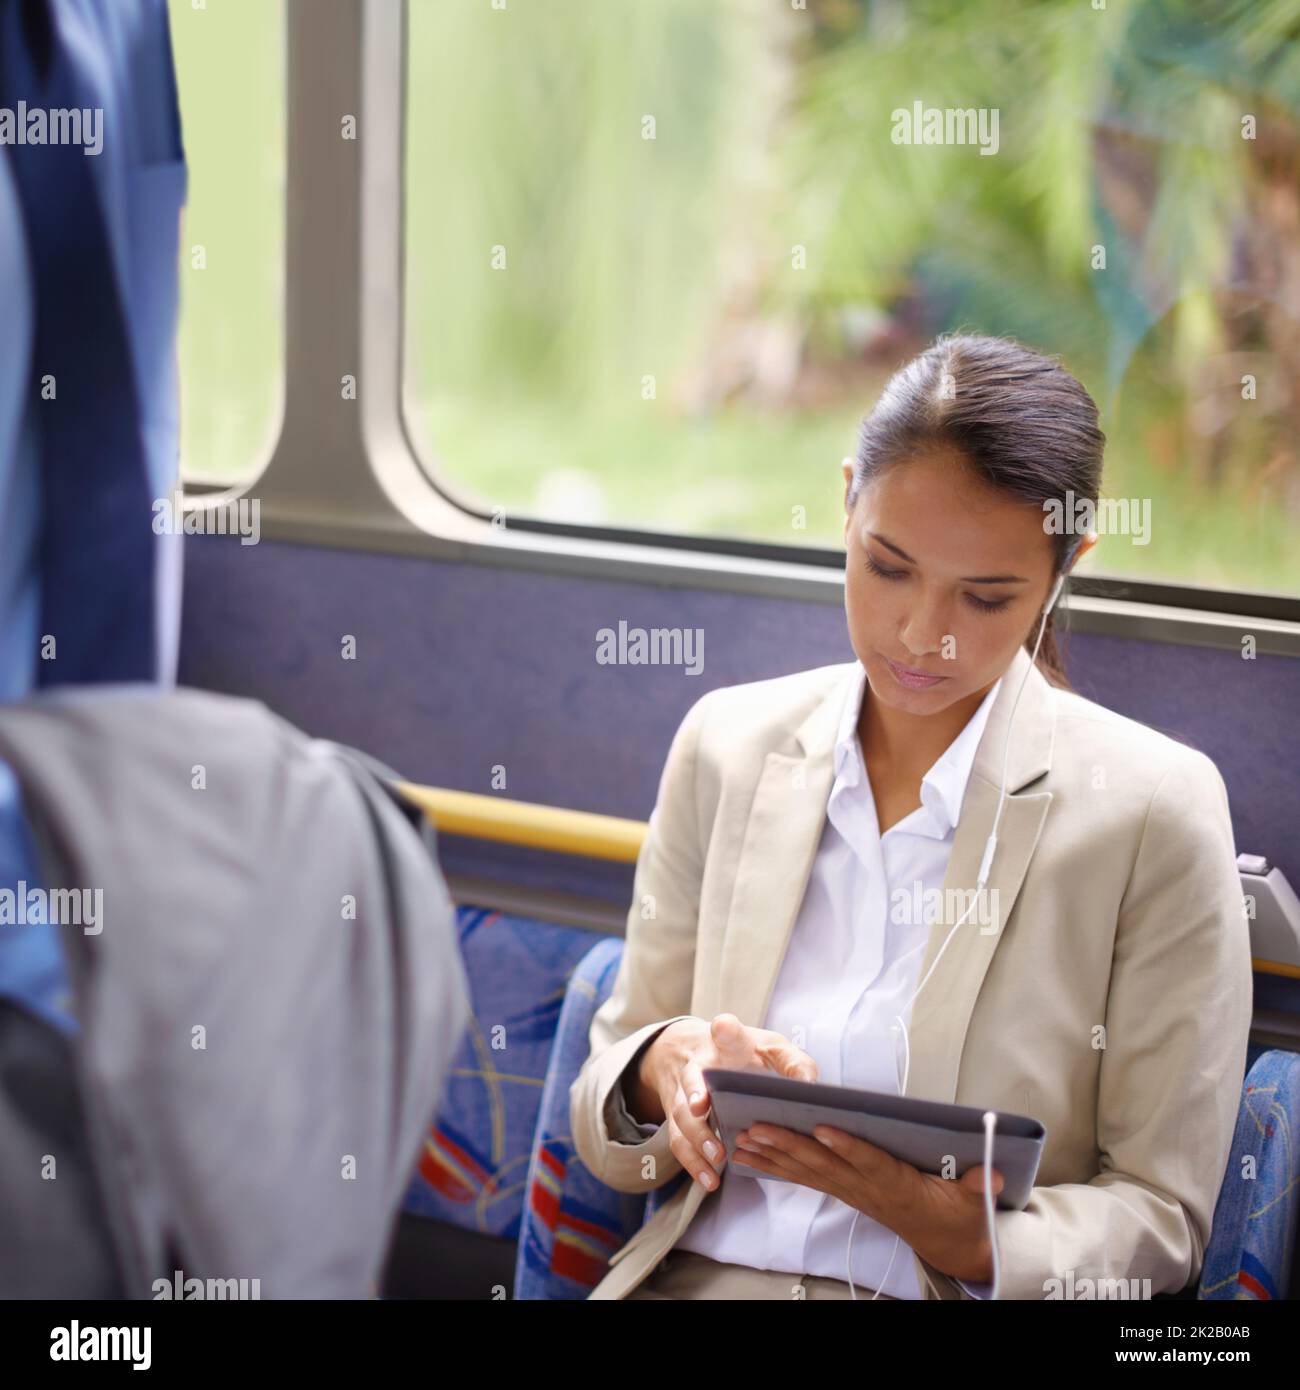 Shes never bored on the bus. Shot of a businesswoman using a digital tablet while commuting on a bus. Stock Photo